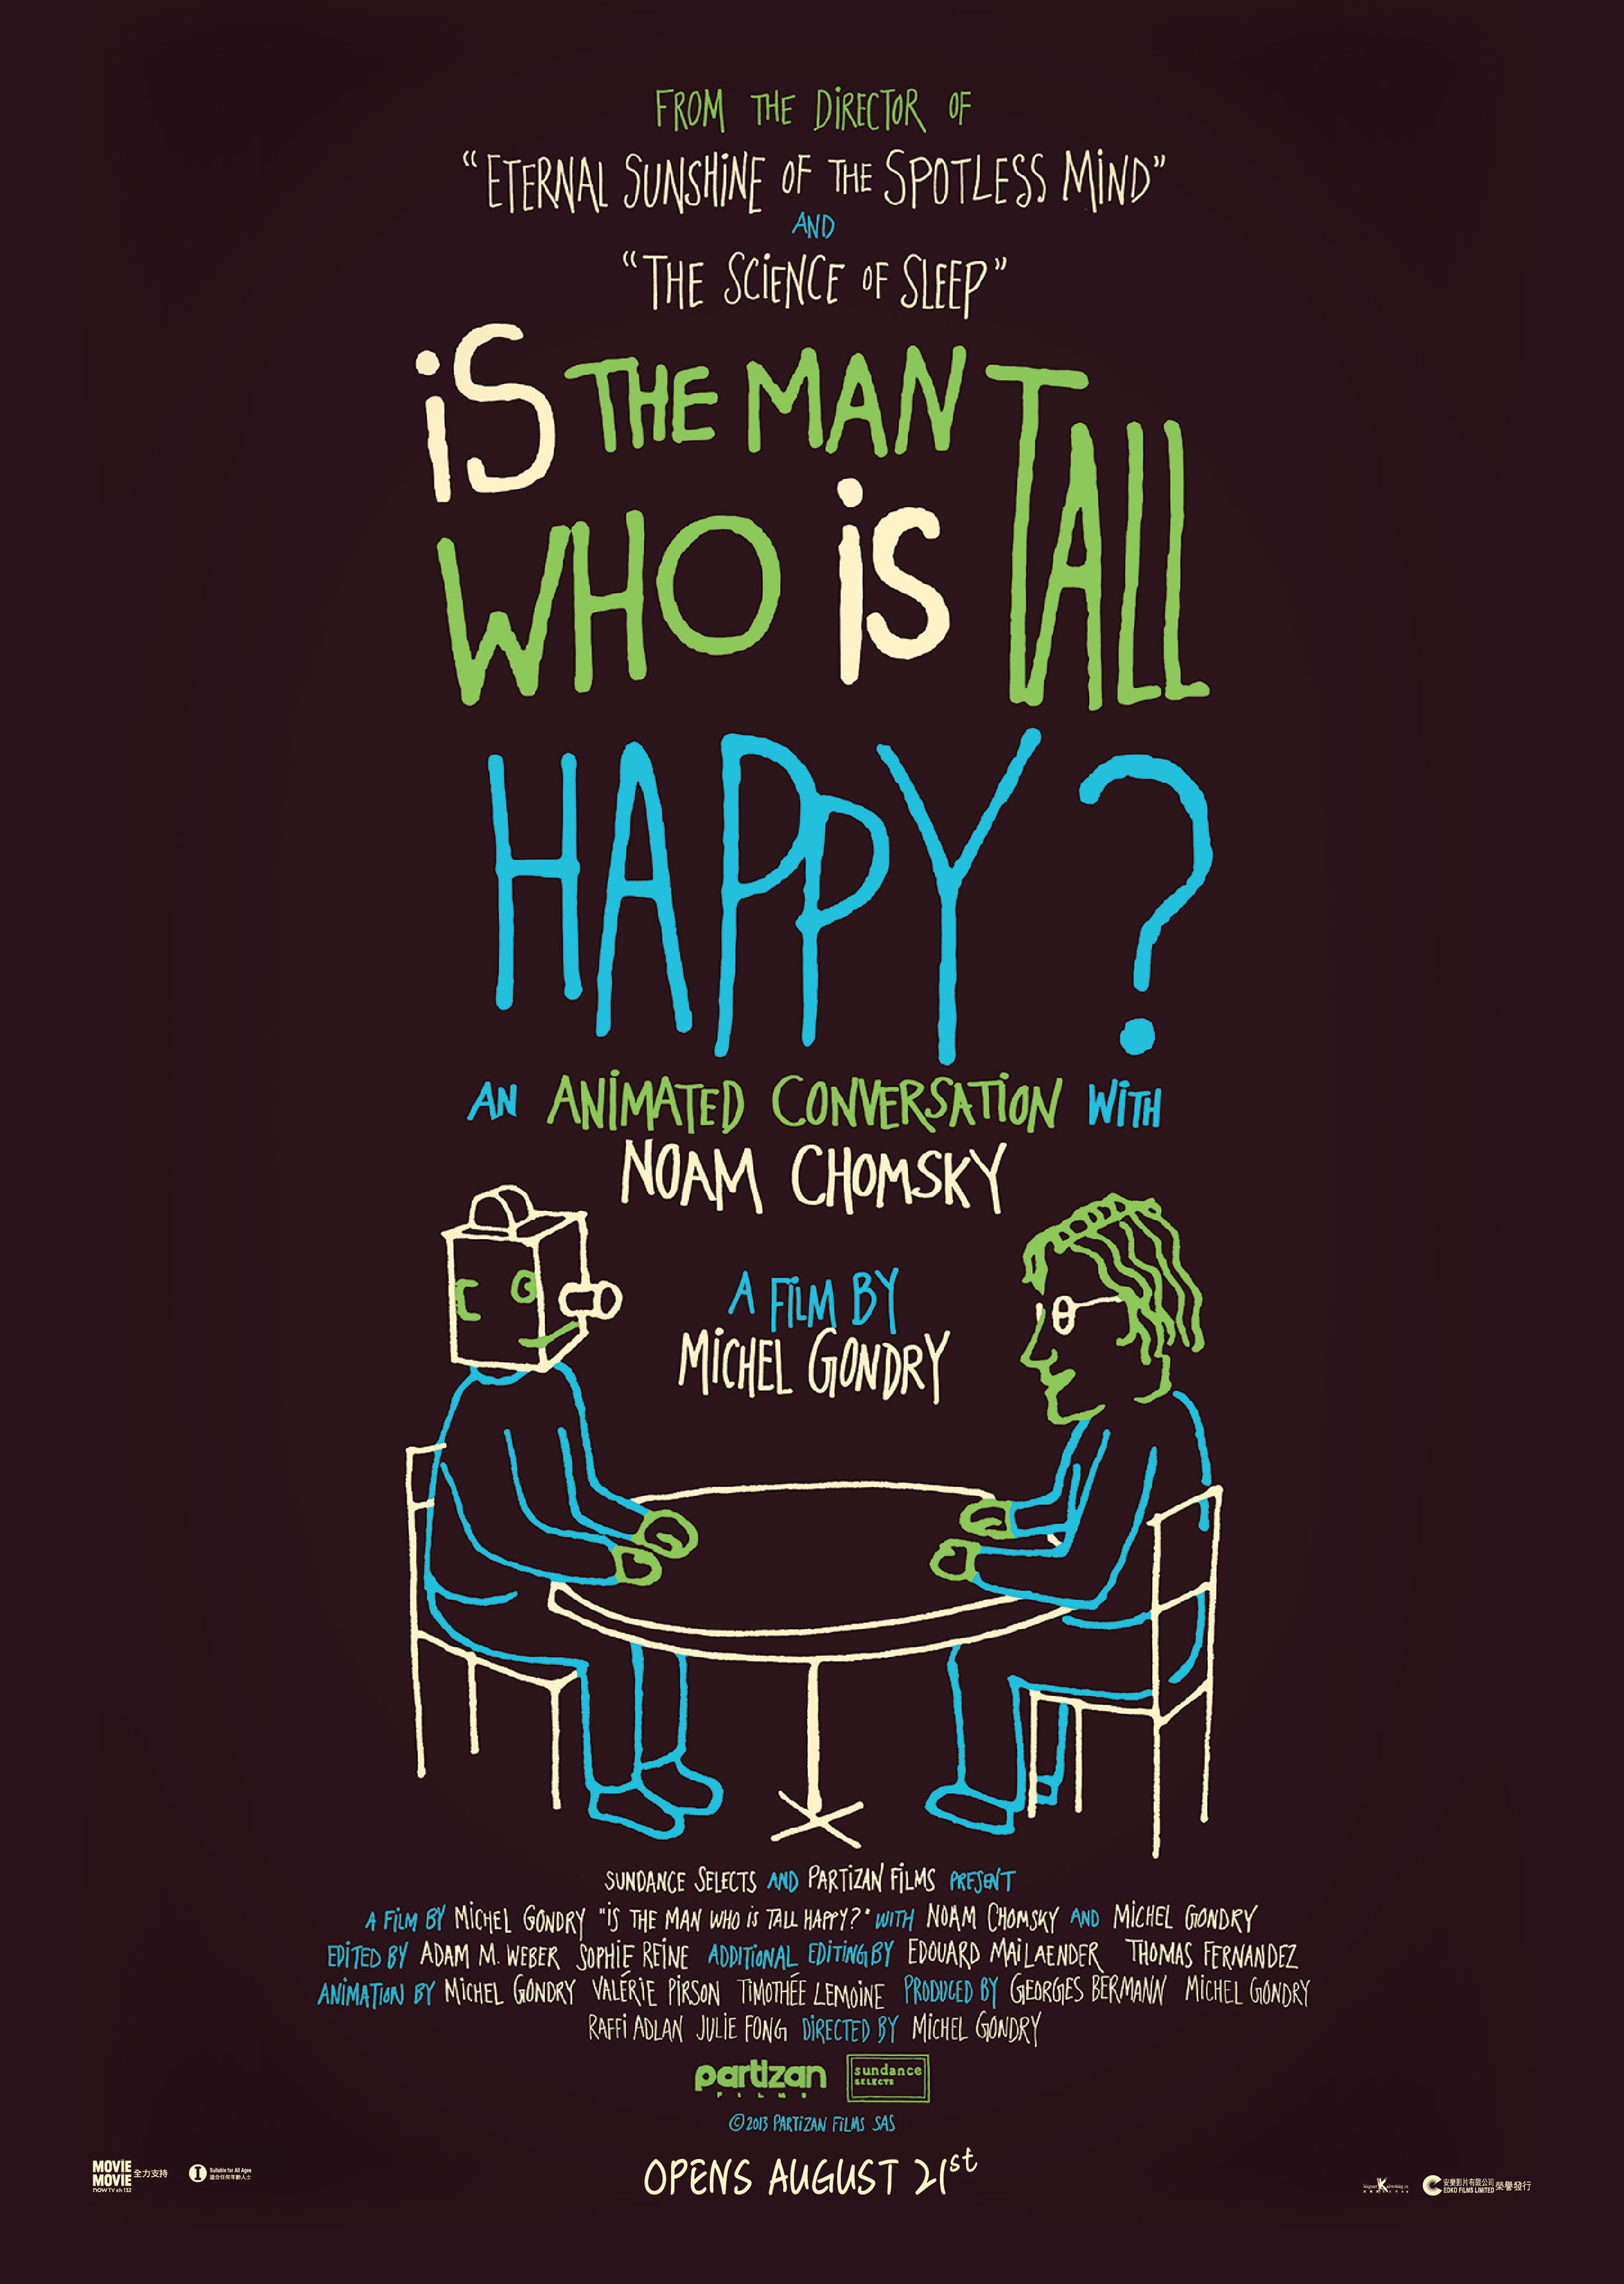 IS THE MAN WHO IS TALL HAPPY? 　Special Screening